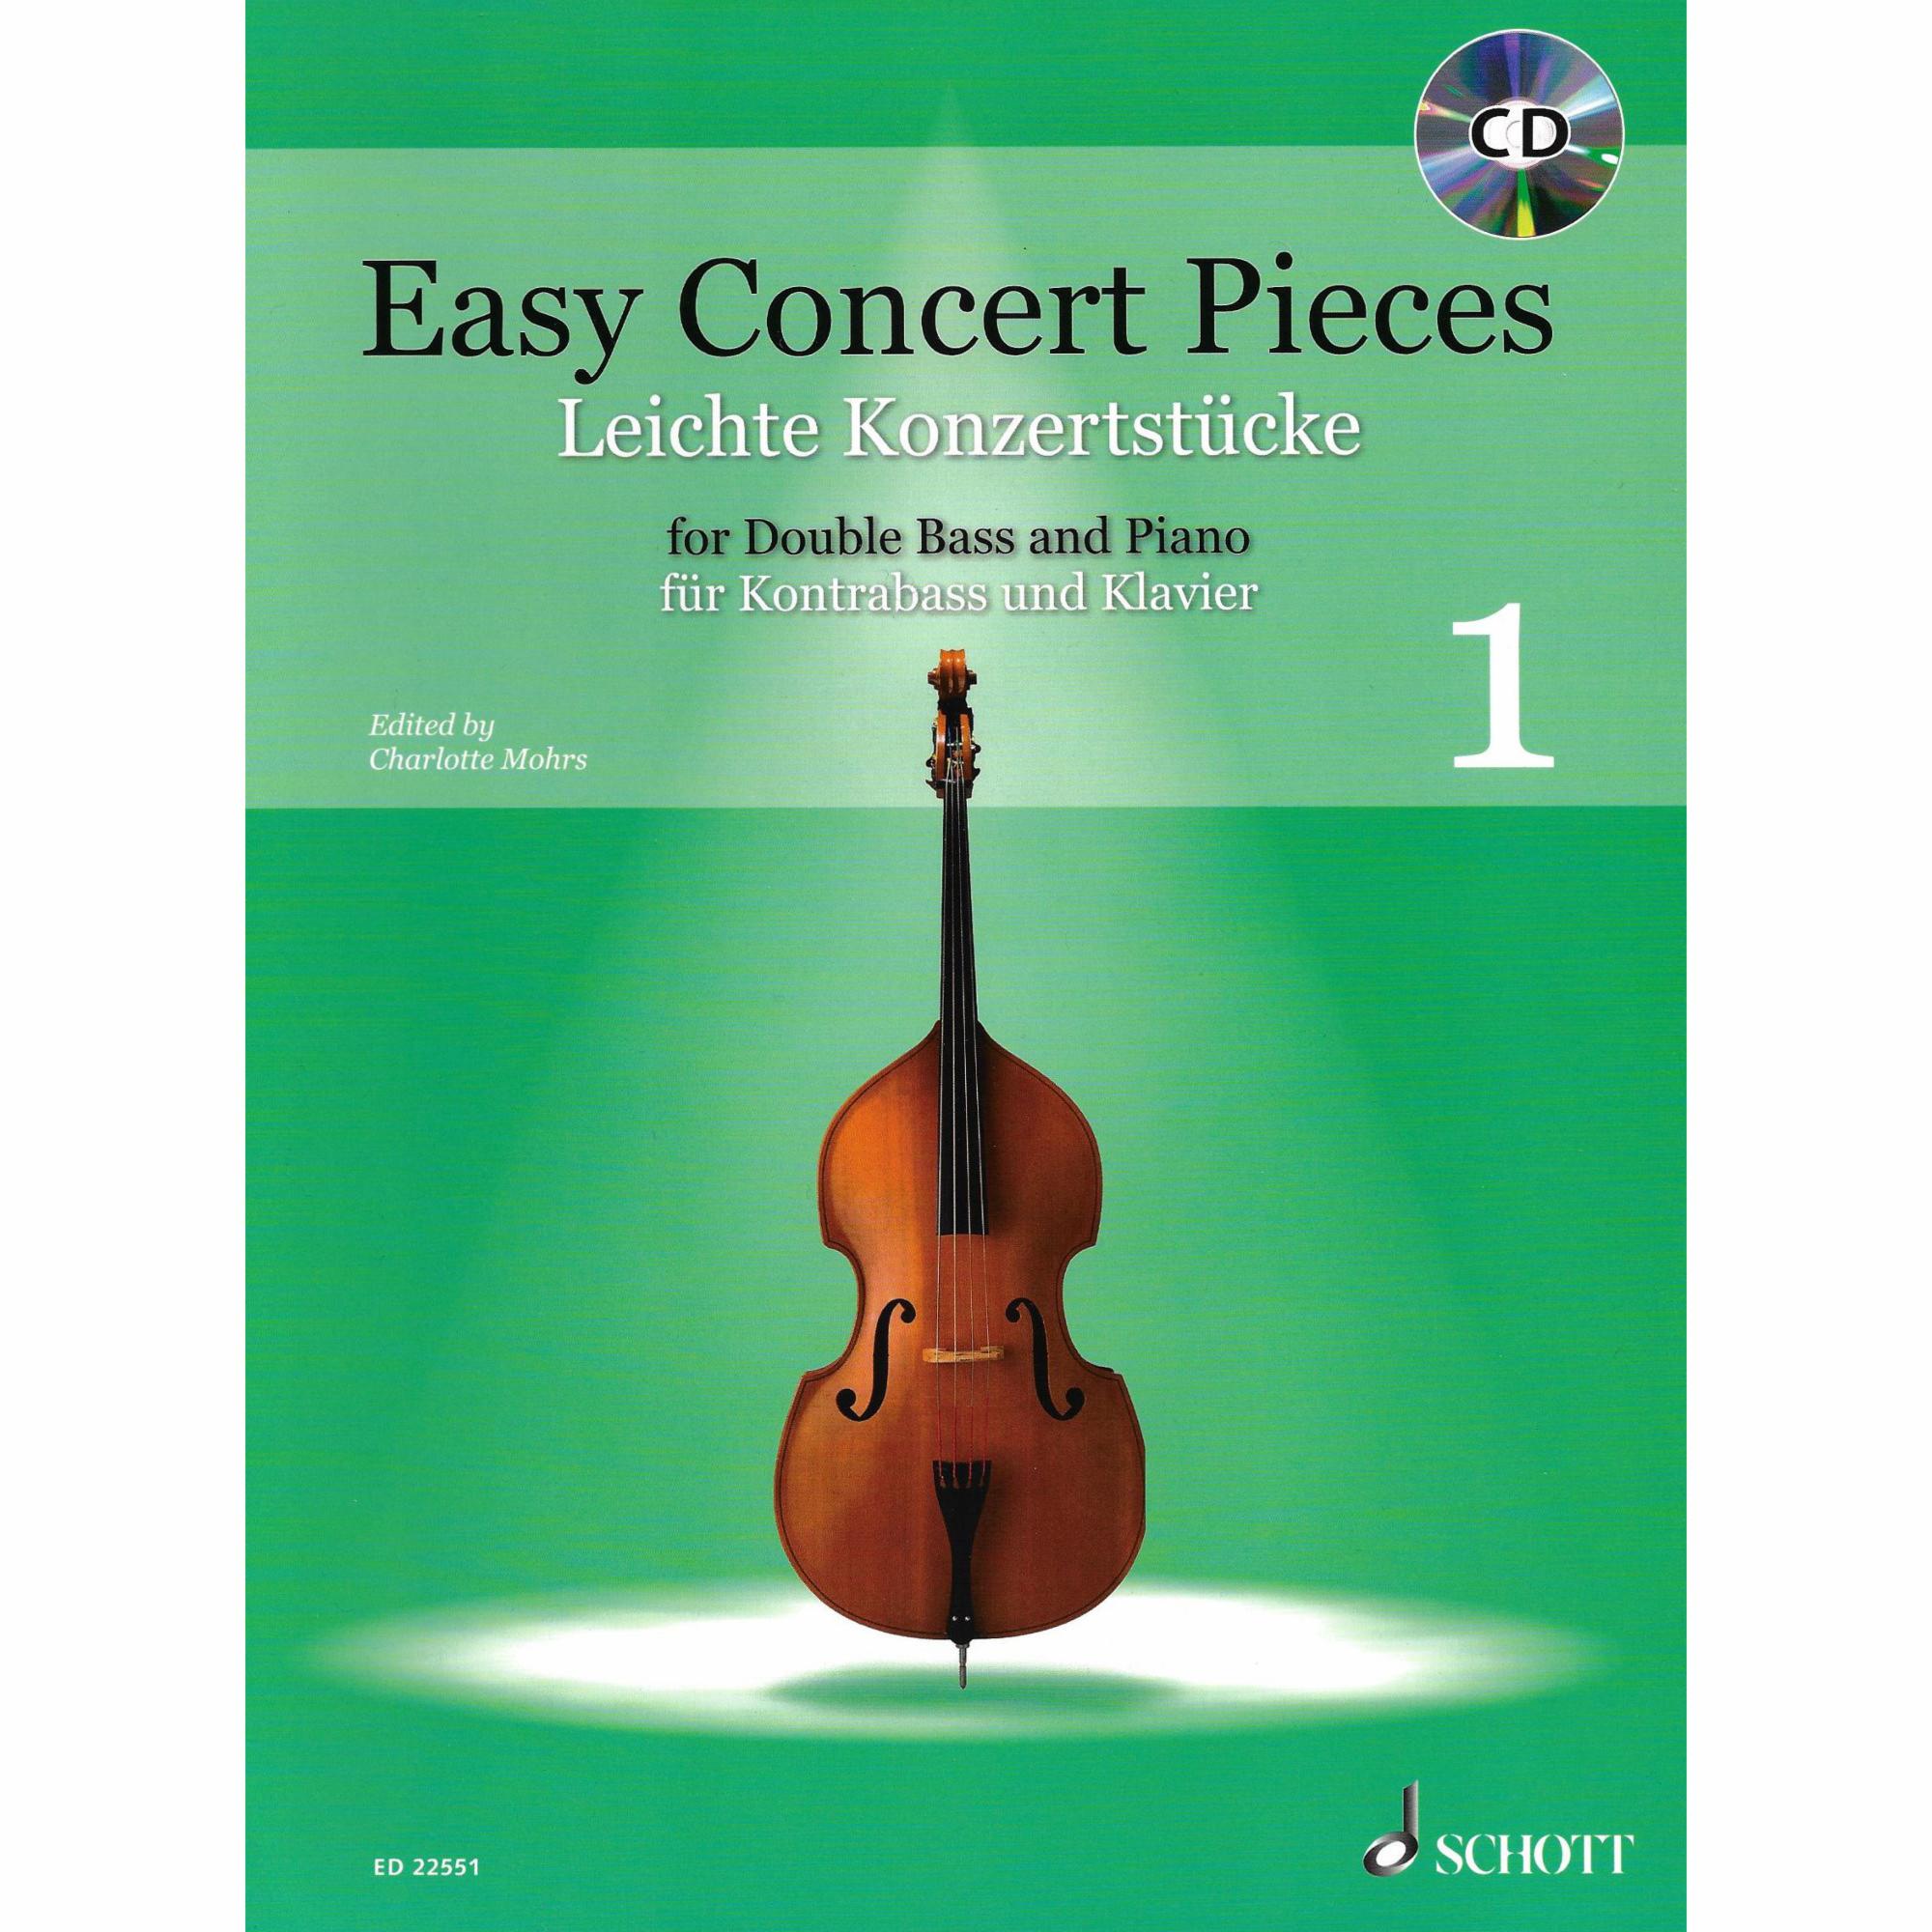 Easy Concert Pieces, Vols. 1-3 for Bass and Piano